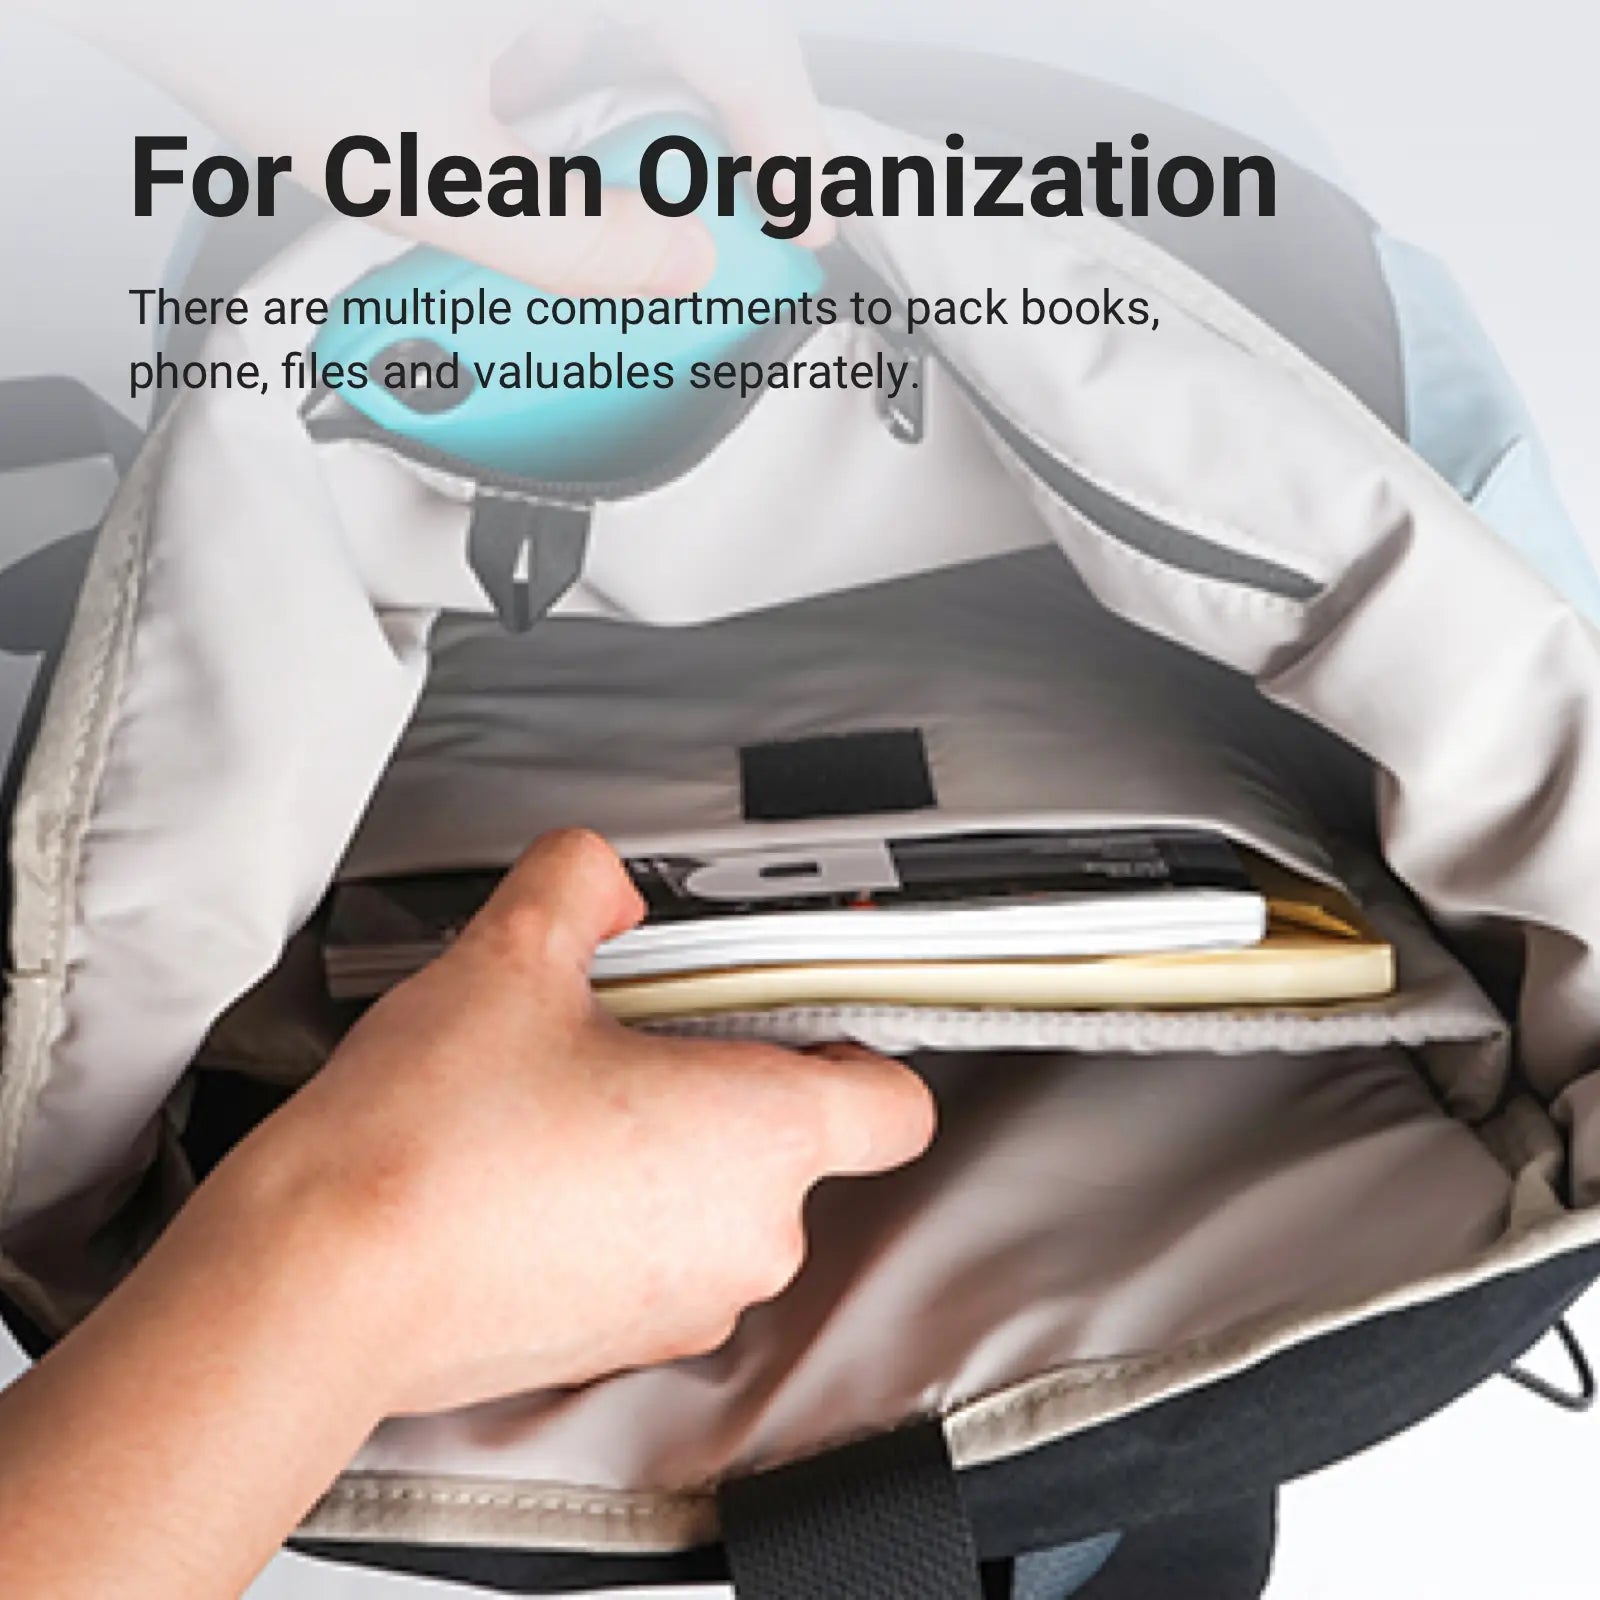 There are multiple compartments to pack books, phone, files and valuables separately